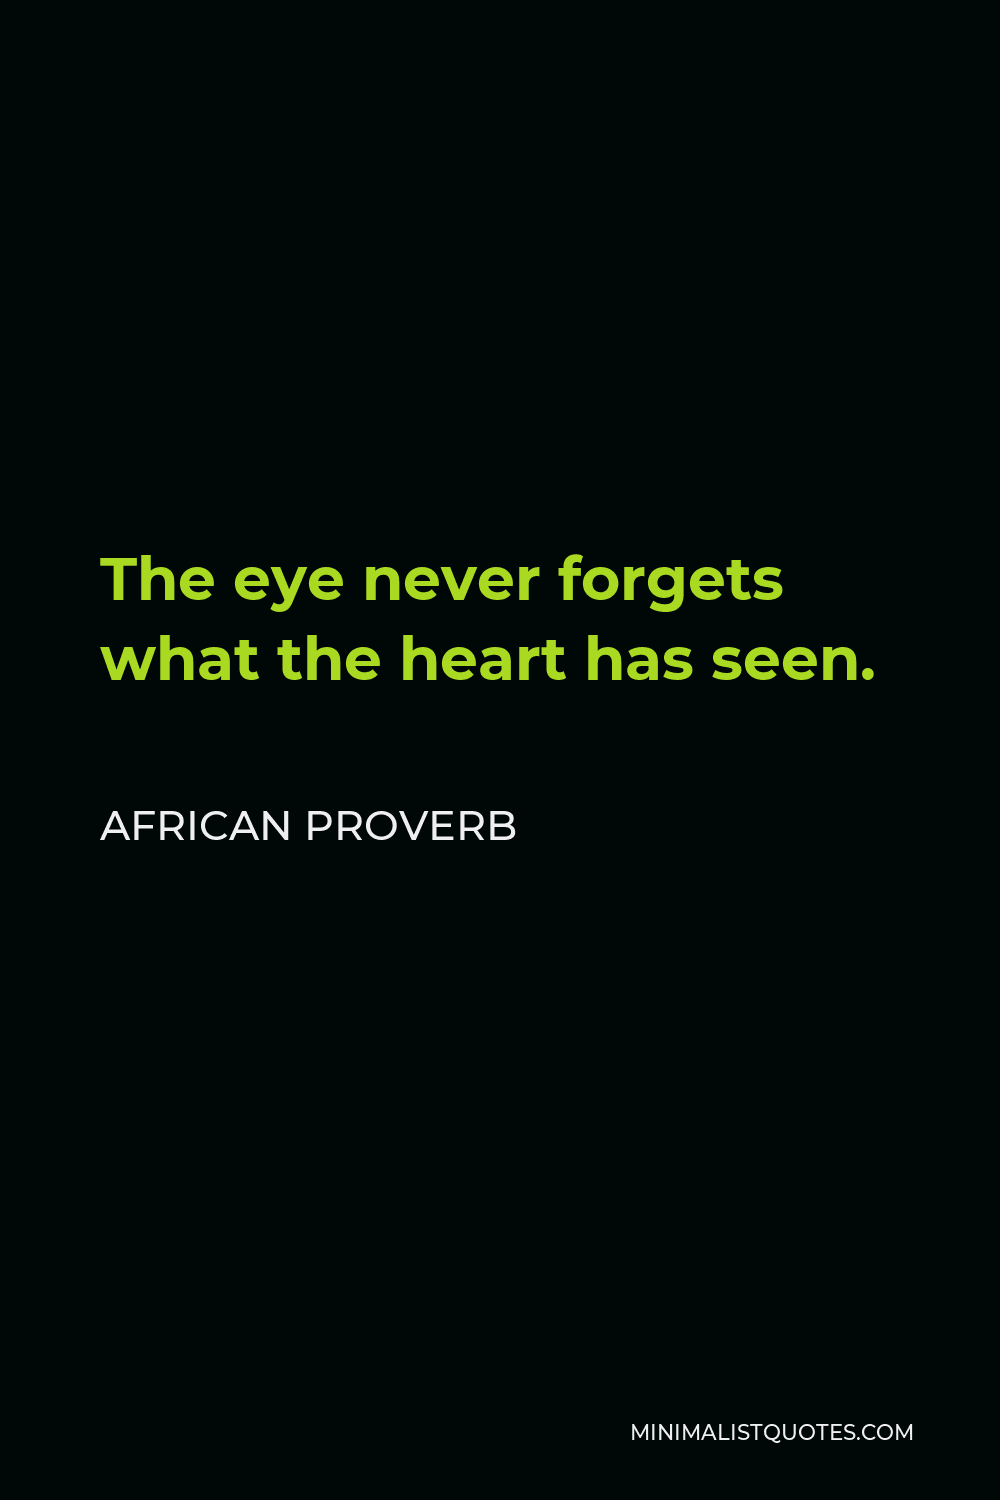 African Proverb Quote - The eye never forgets what the heart has seen.